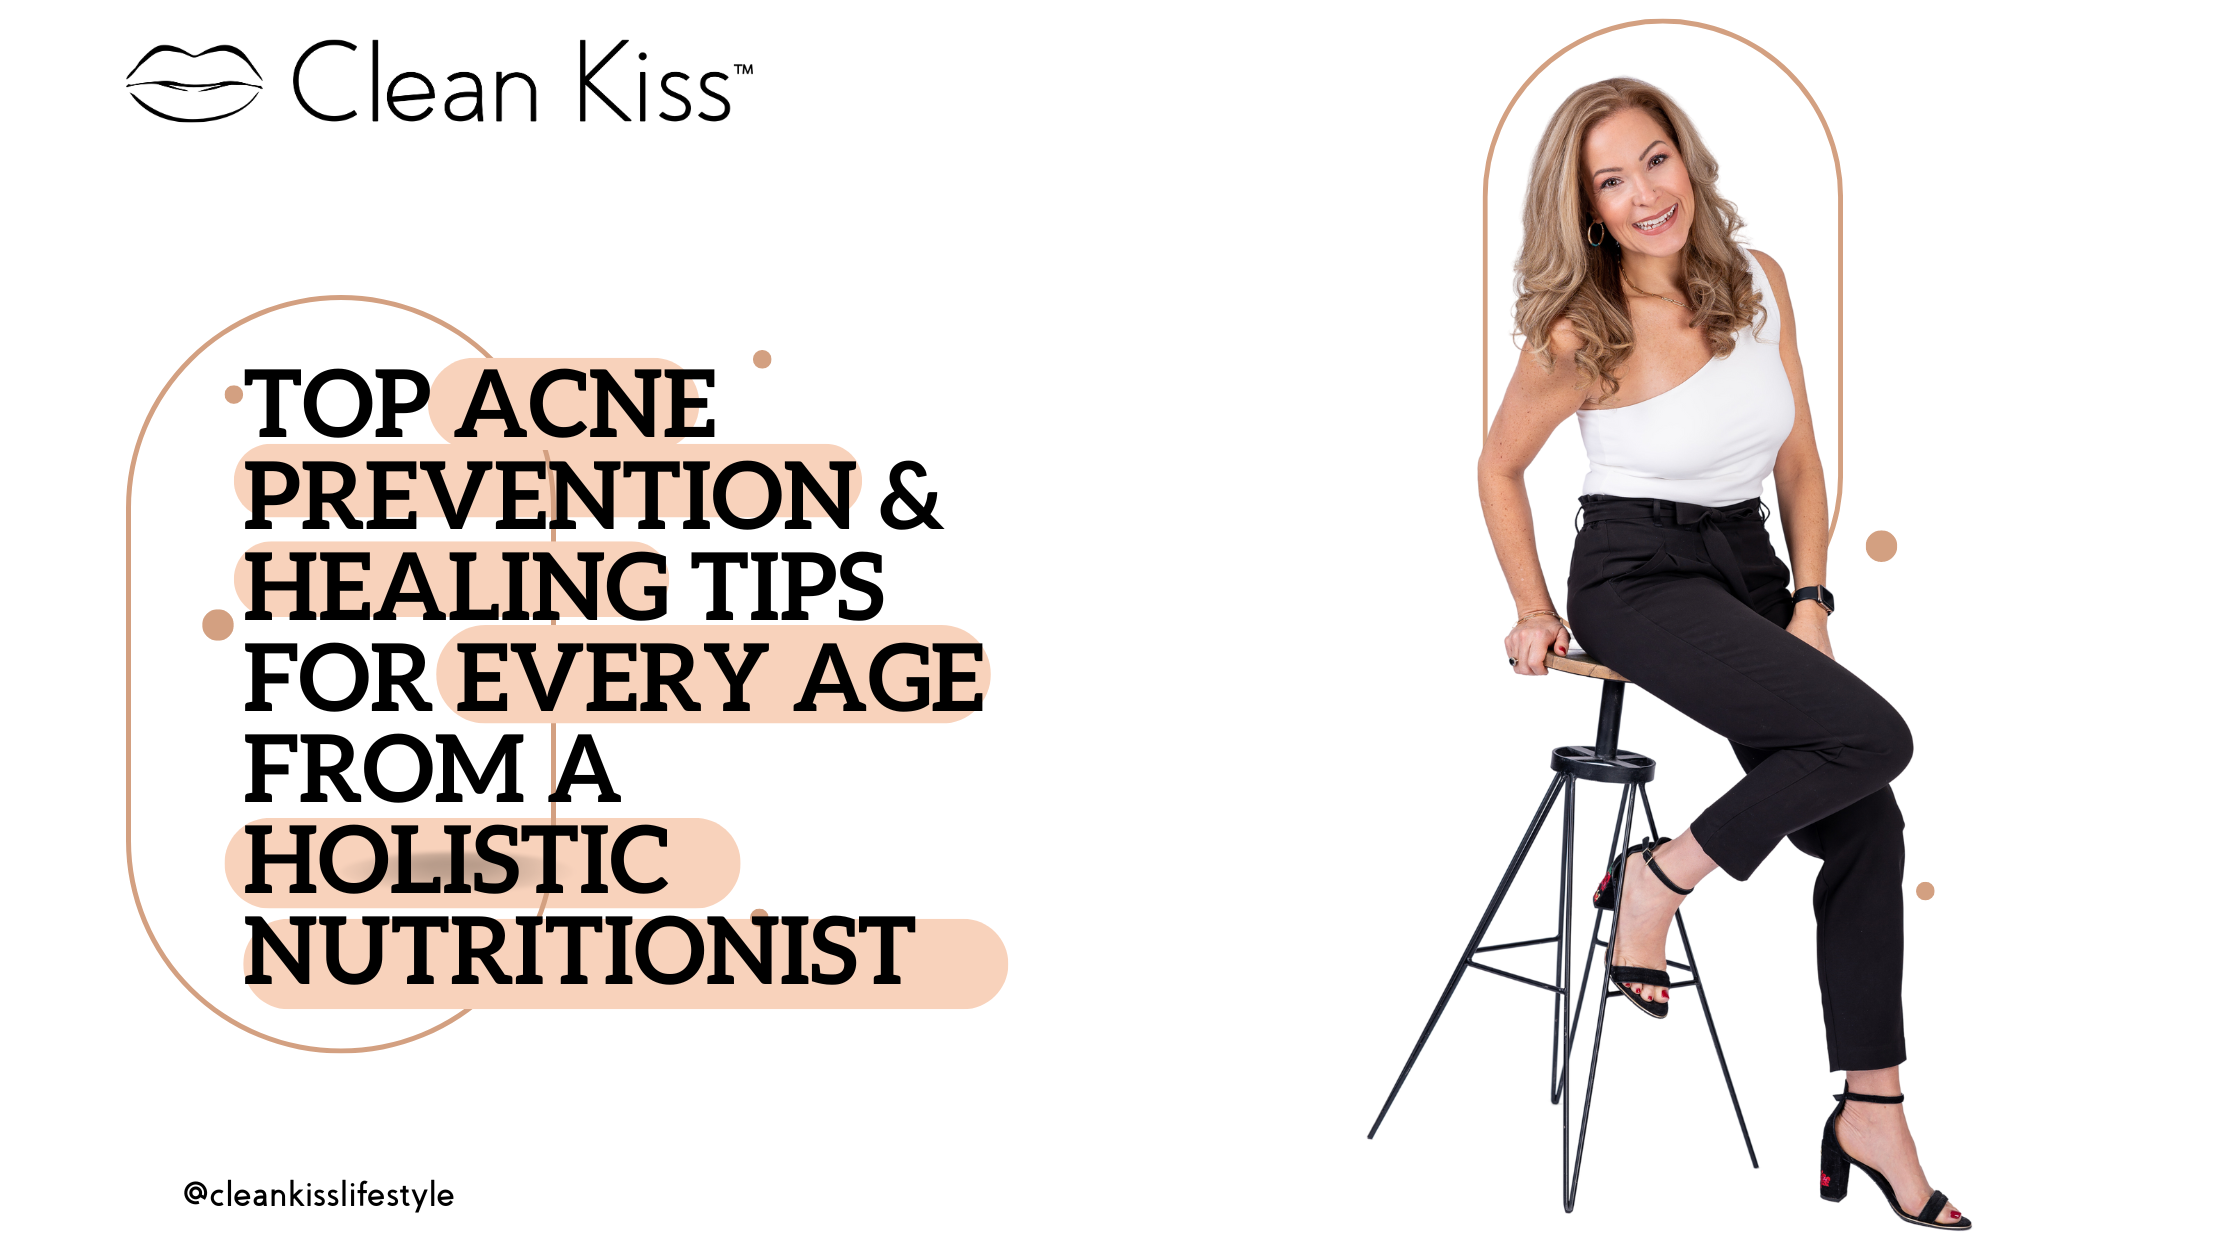 Top Acne Prevention & Healing Tips from a Holistic Nutritionist